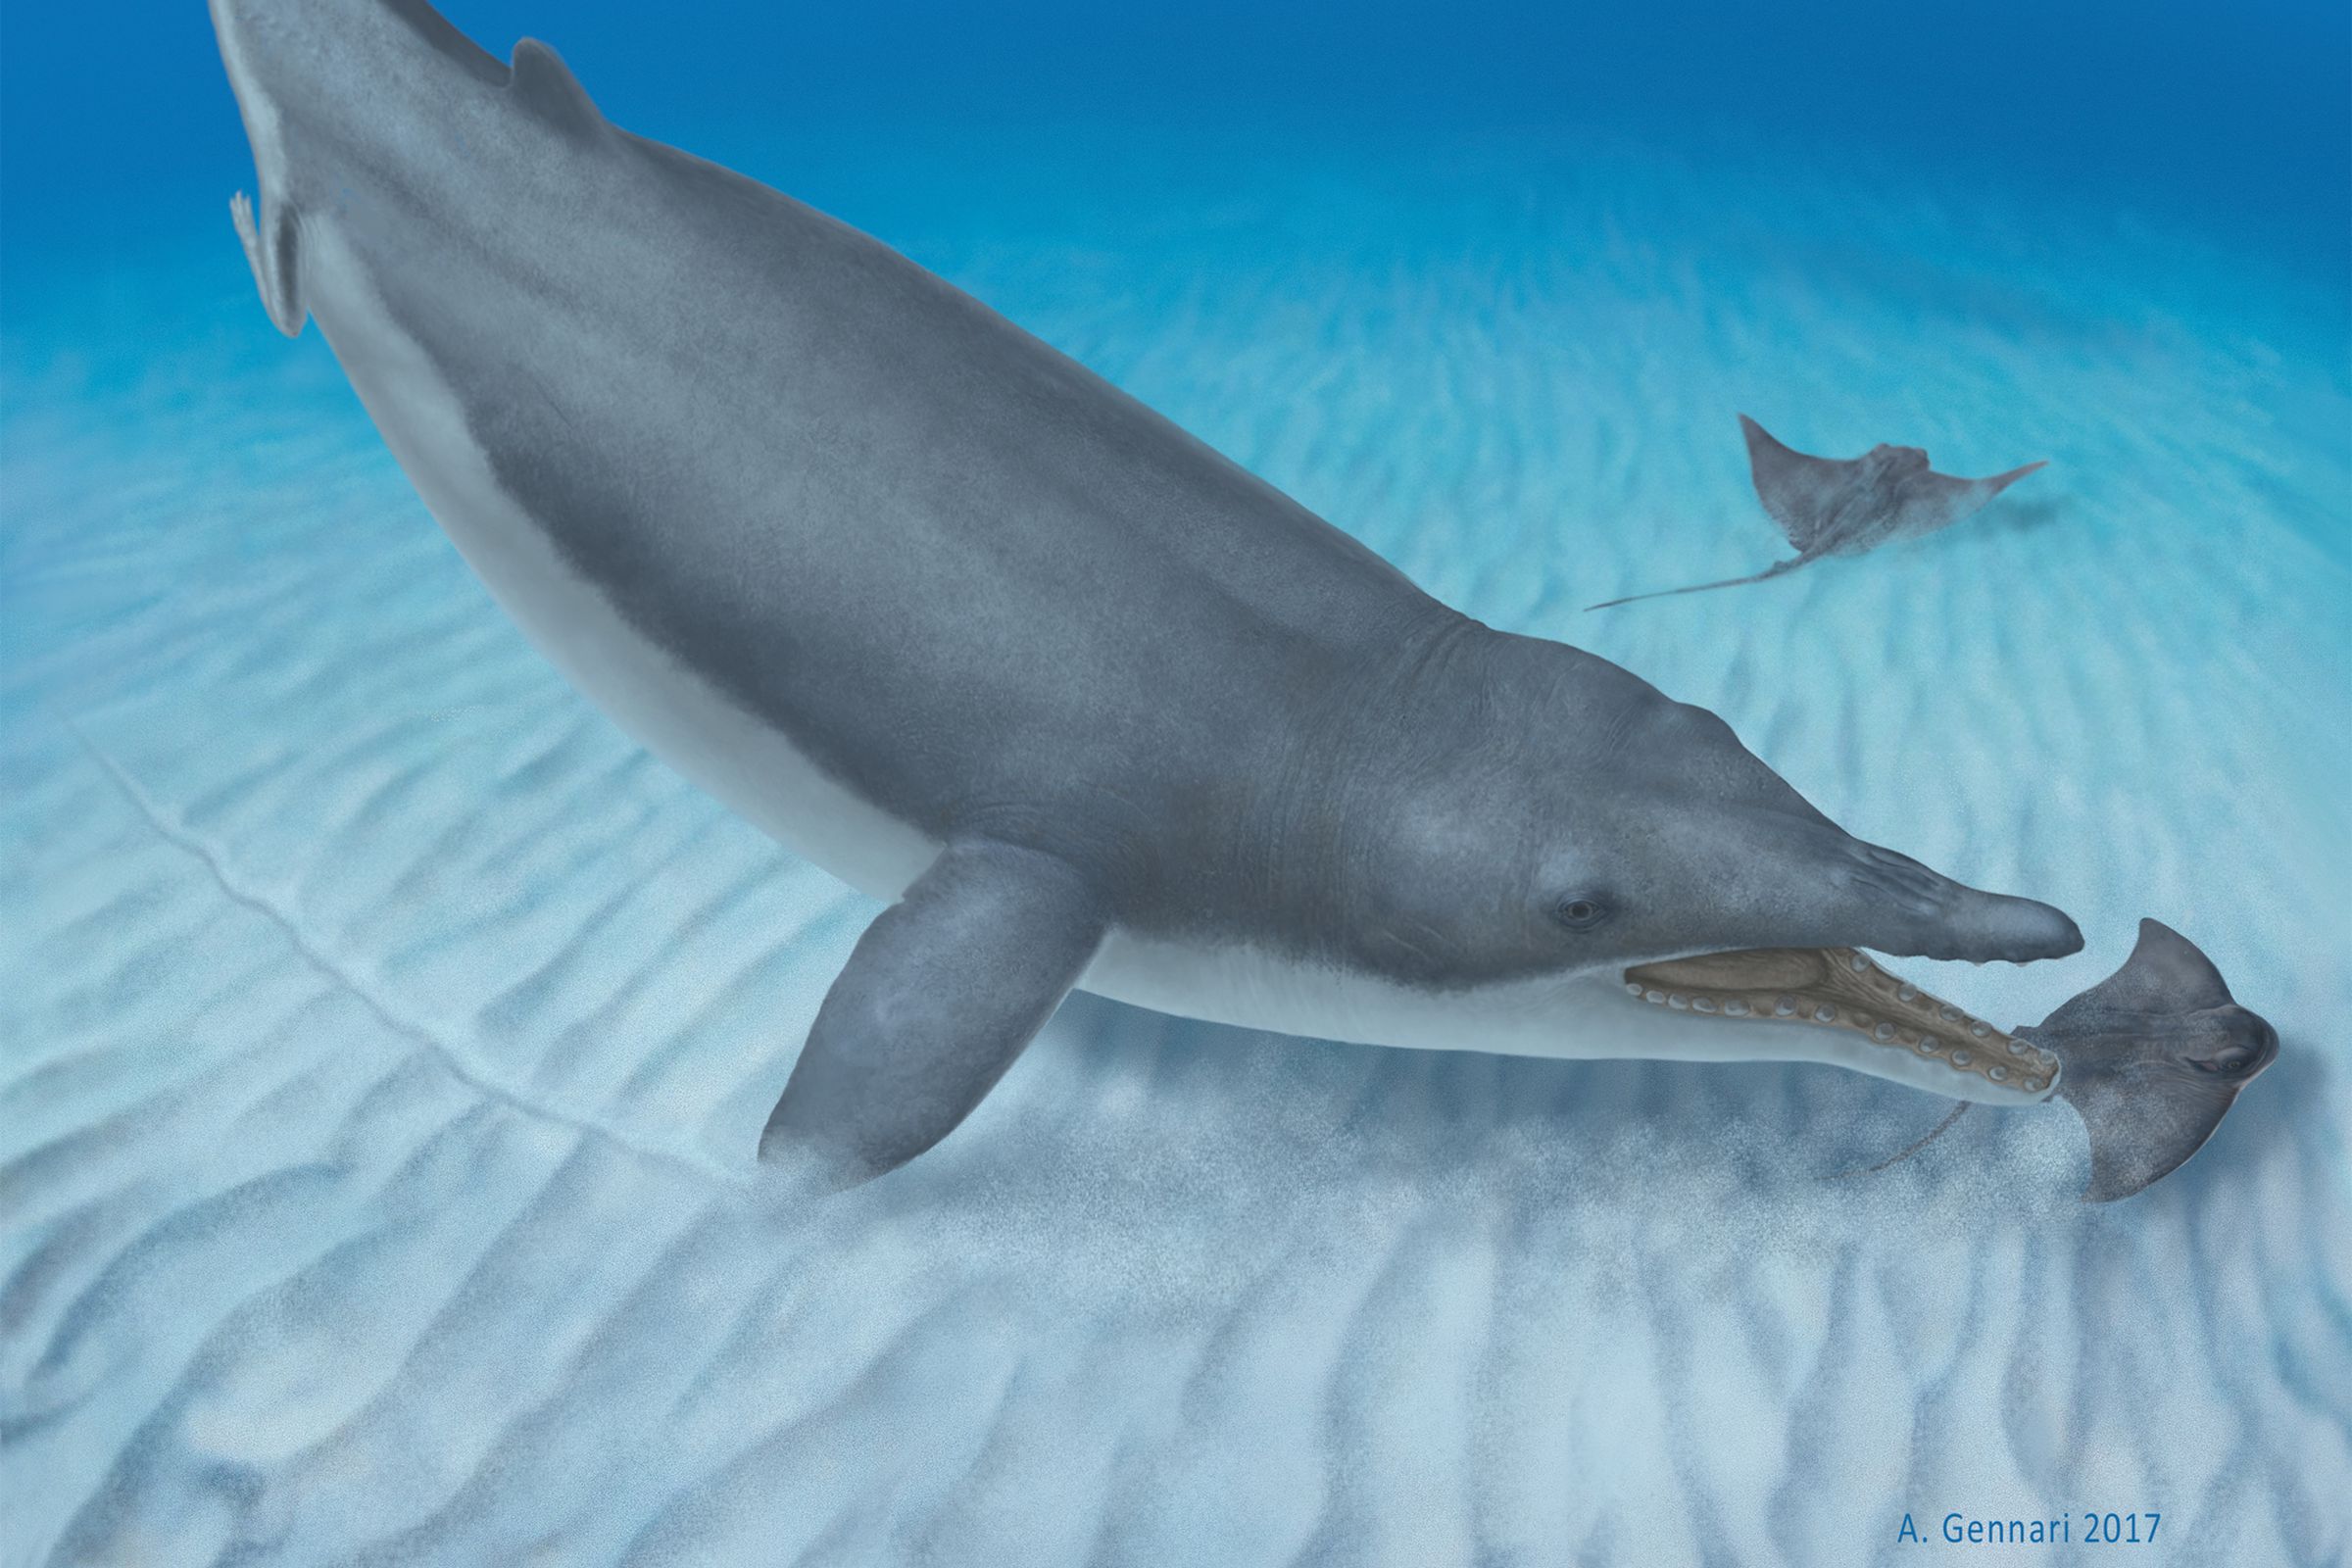 An illustration of Mystacodon selenensis diving down to catch eagle rays along the seafloor off the coast of present-day Peru.